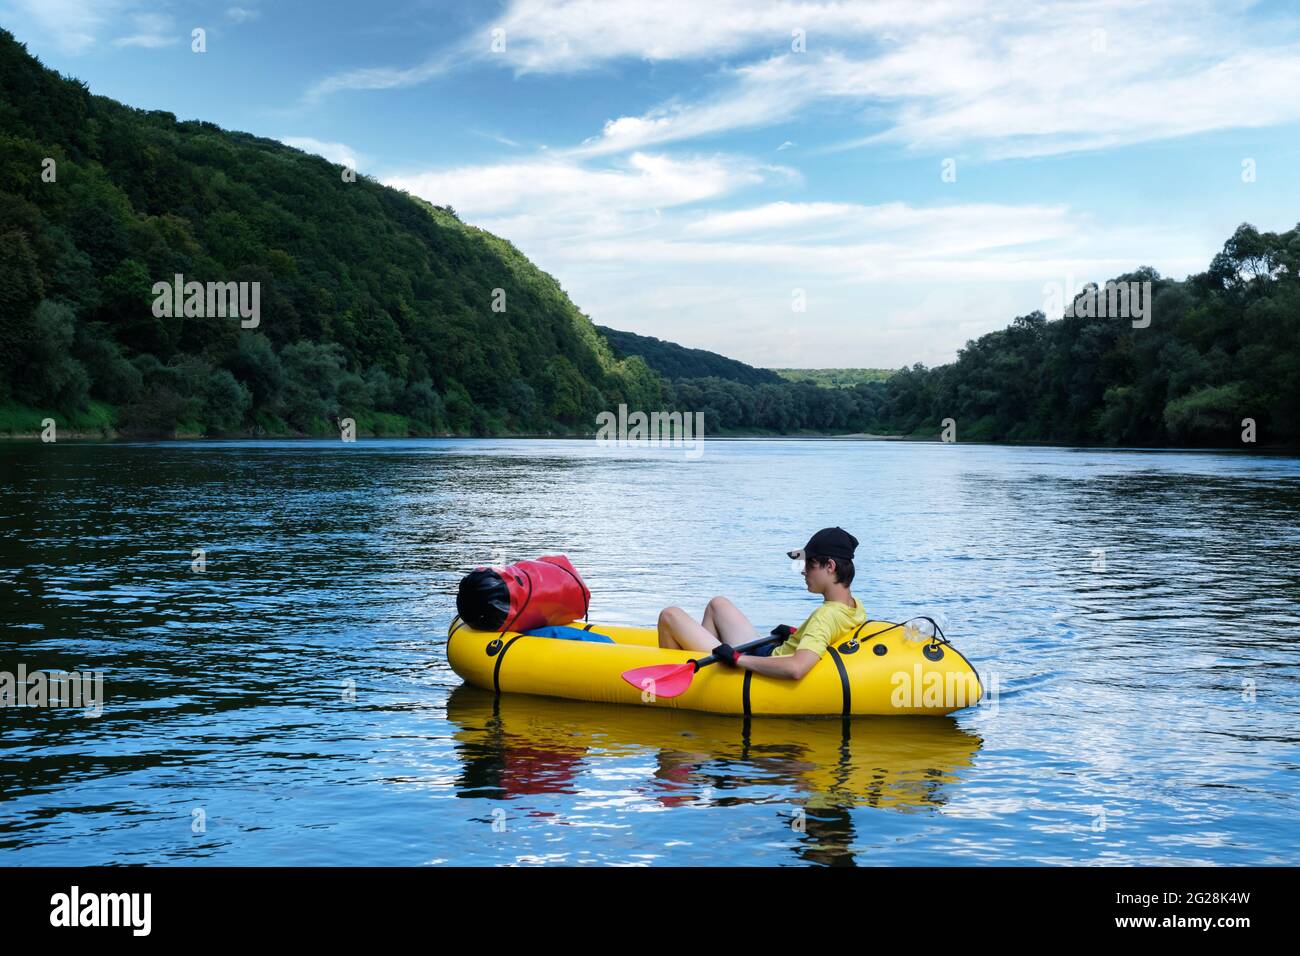 Tourist on yellow packraft rubber boat with red padle on a sunrise river. Packrafting. Active lifestile concept Stock Photo